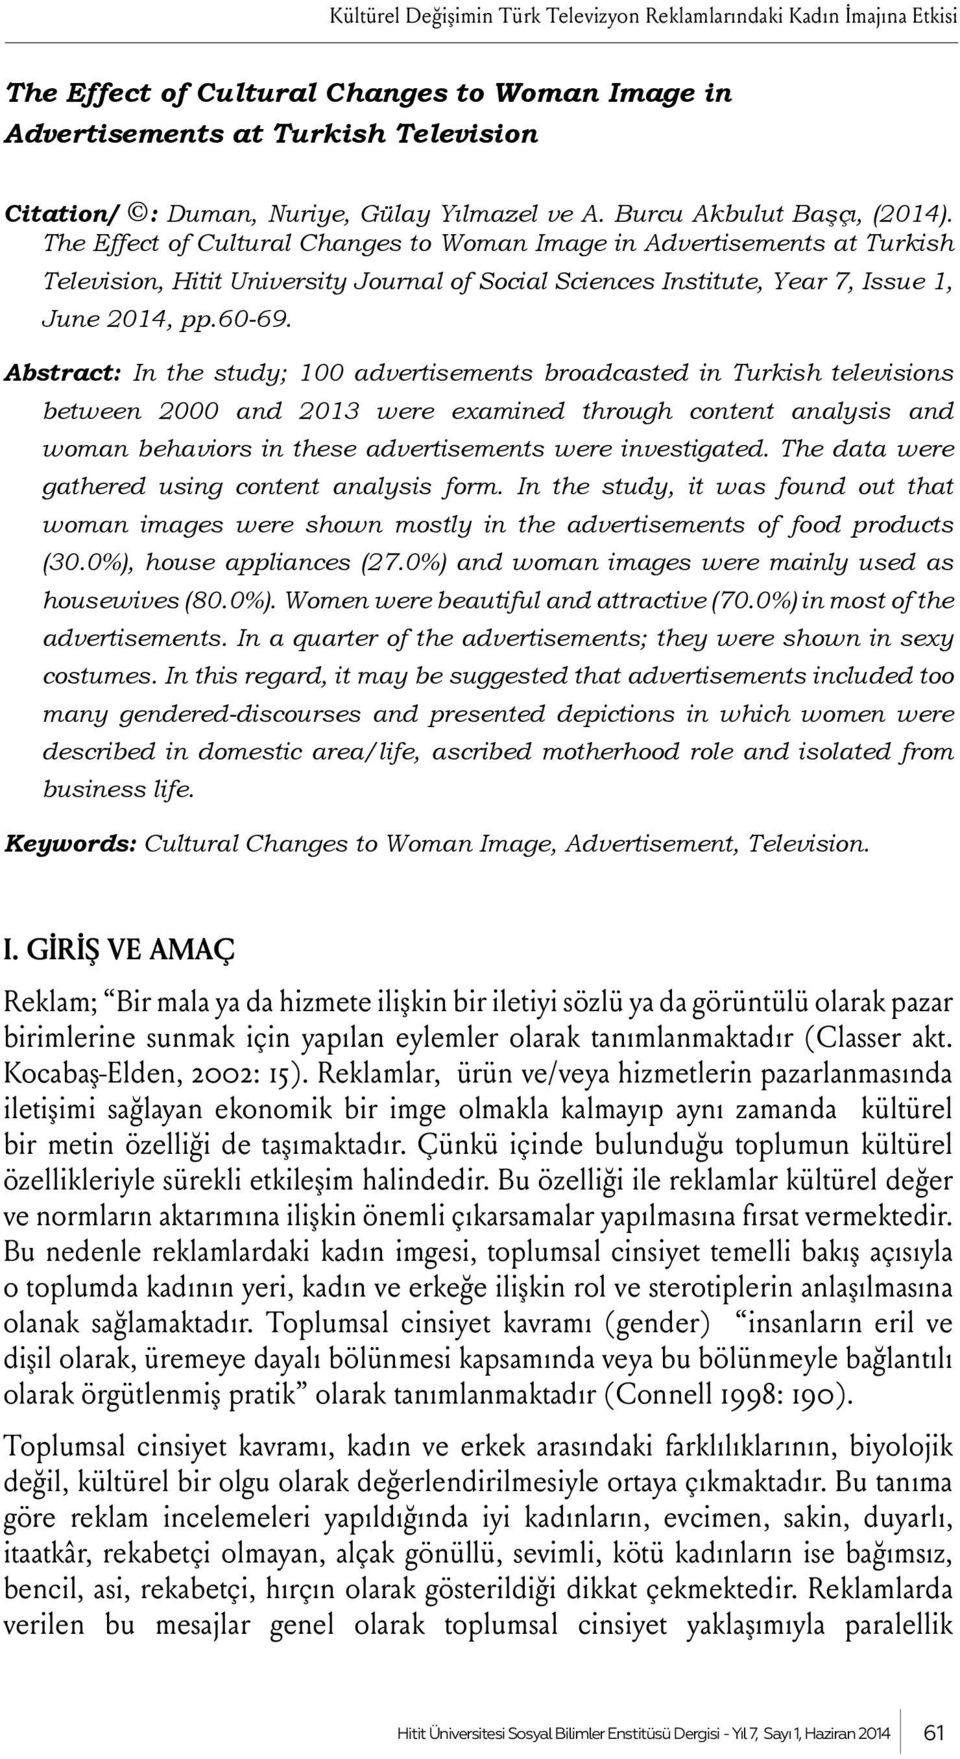 The Effect of Cultural Changes to Woman Image in Advertisements at Turkish Television, Hitit University Journal of Social Sciences Institute, Year 7, Issue 1, June 2014, pp.60-69.